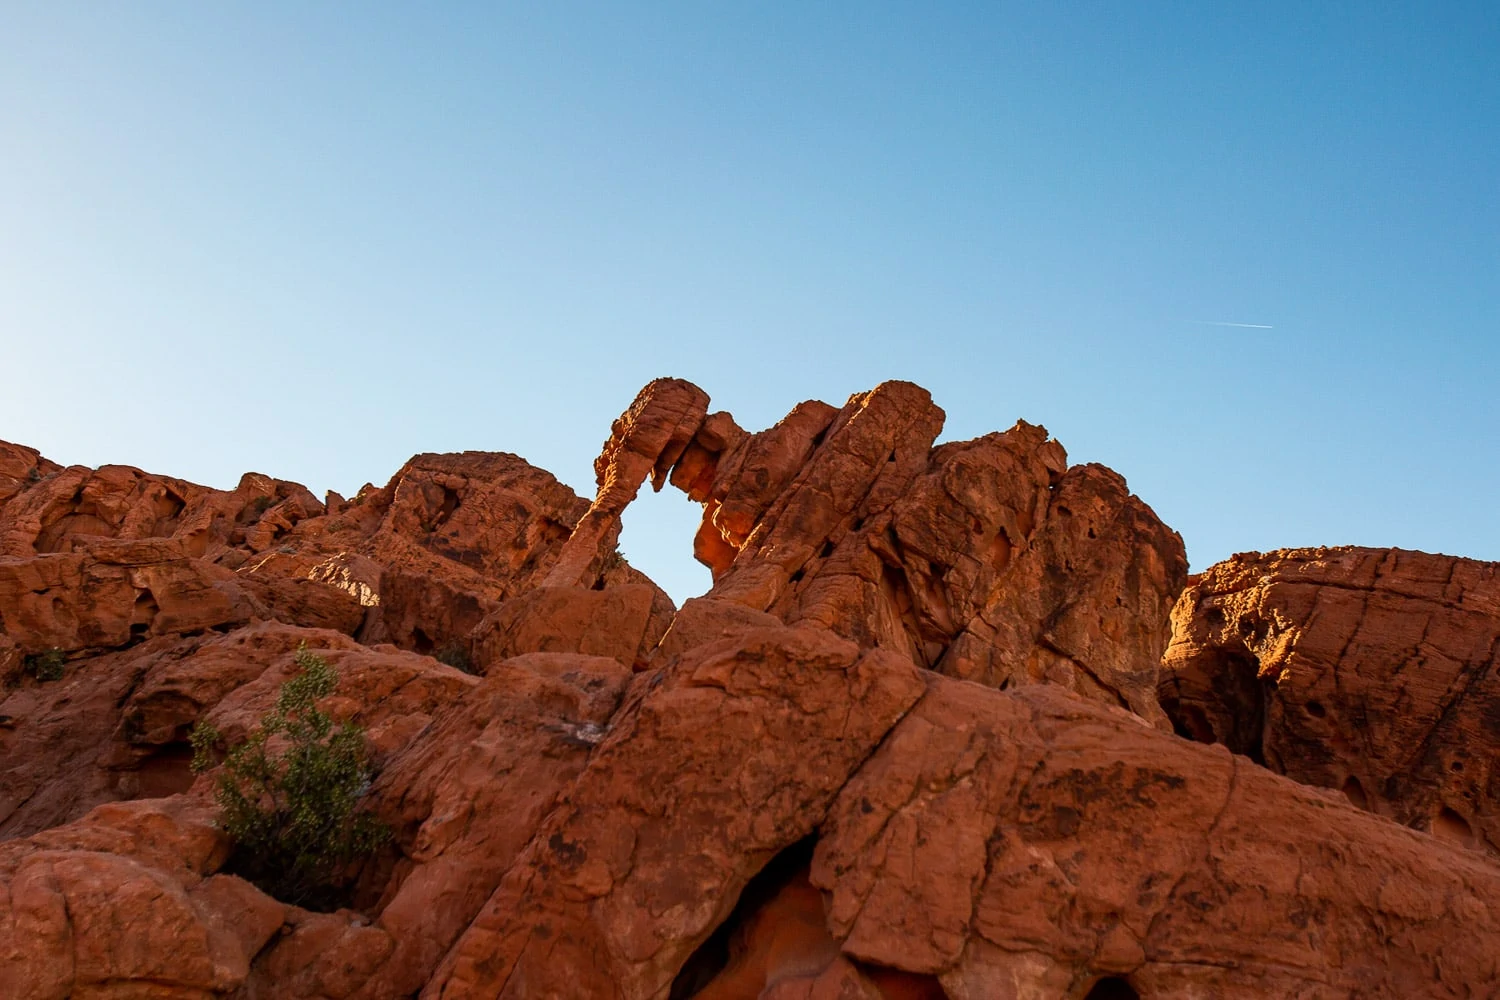 Elephant rock is a sandstone arch in Valley of Fire state park that resembles the outline of an Elephant.